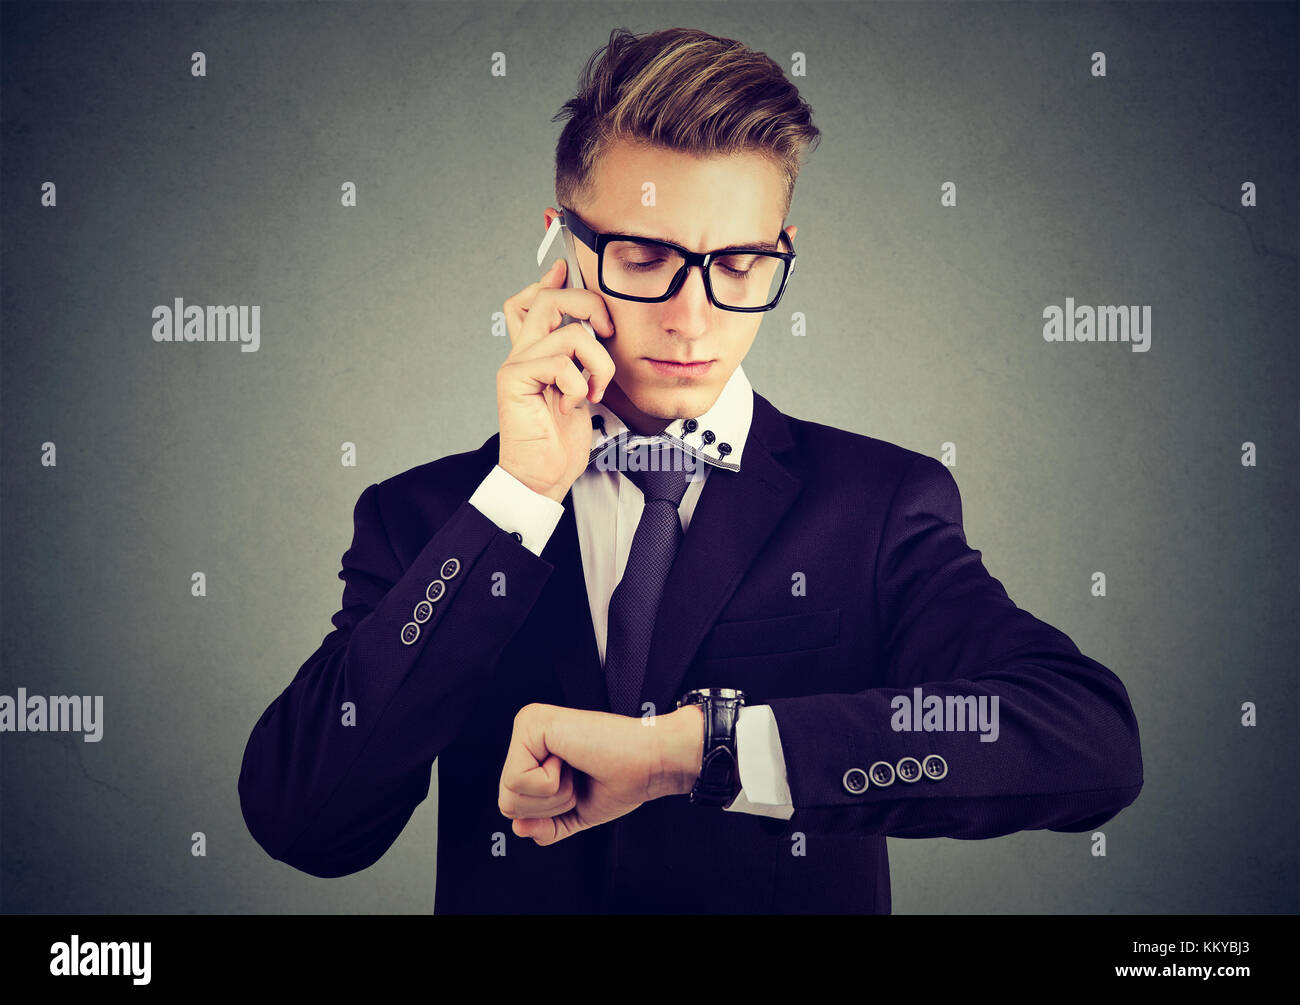 Business and time management concept. Businessman looking at wrist watch, talking on mobile phone. Stock Photo